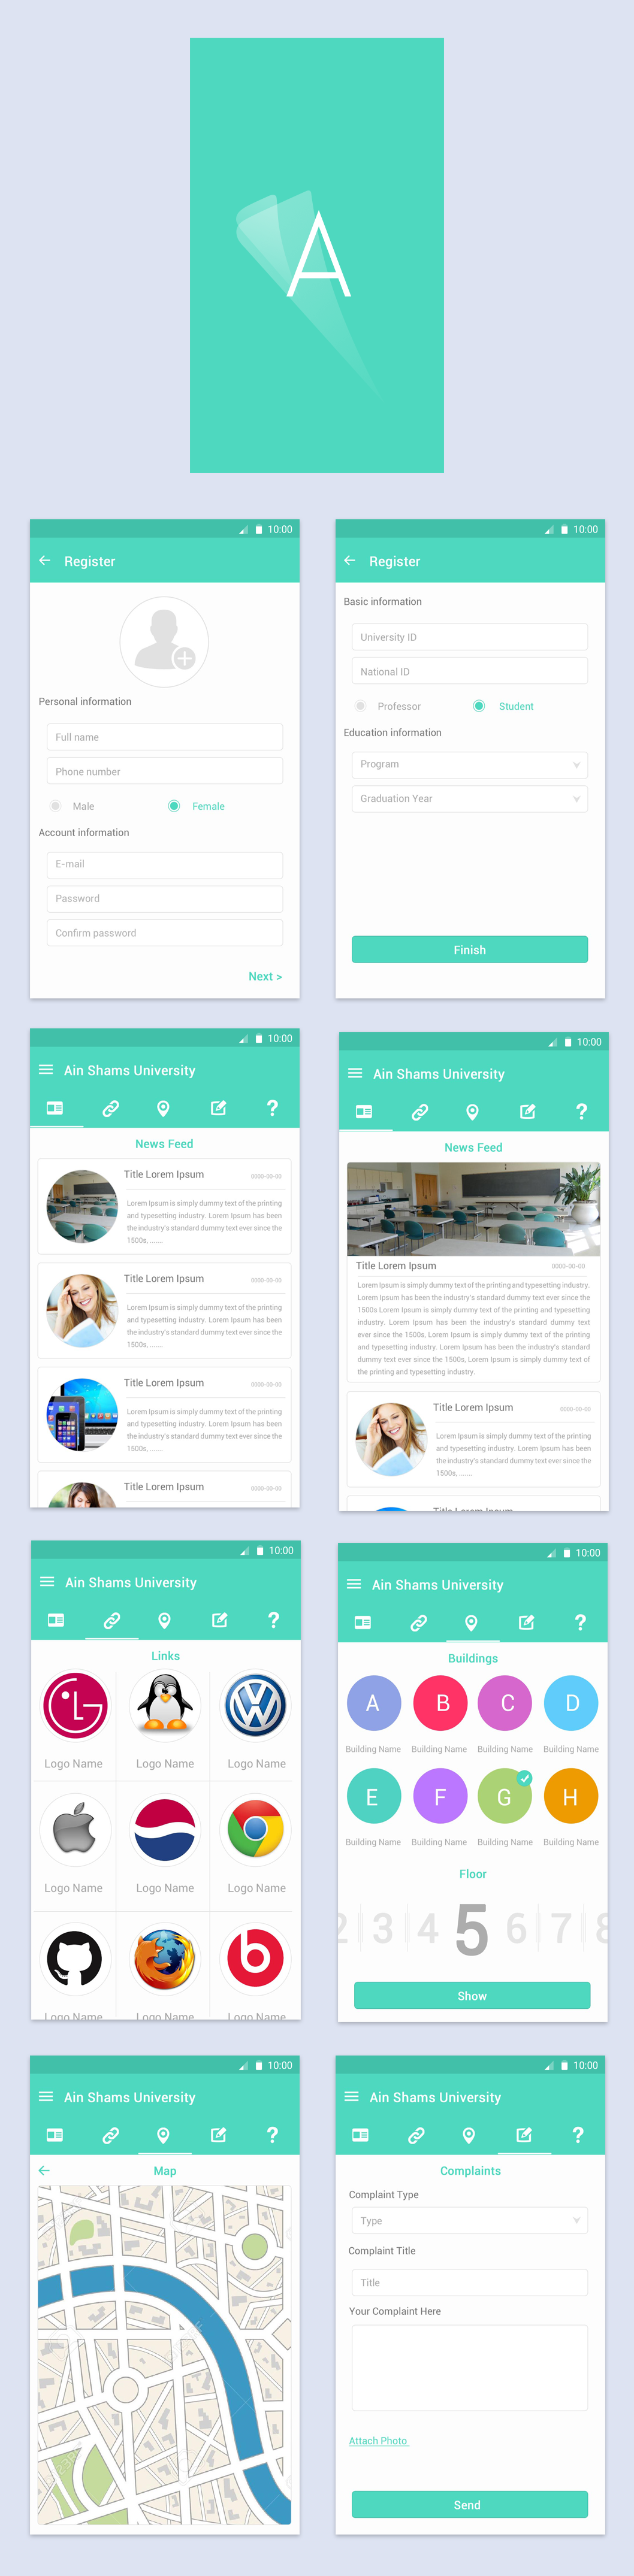 Mobile UI Mobile UX UI/UX University Education android ios design Mobile Application user interface